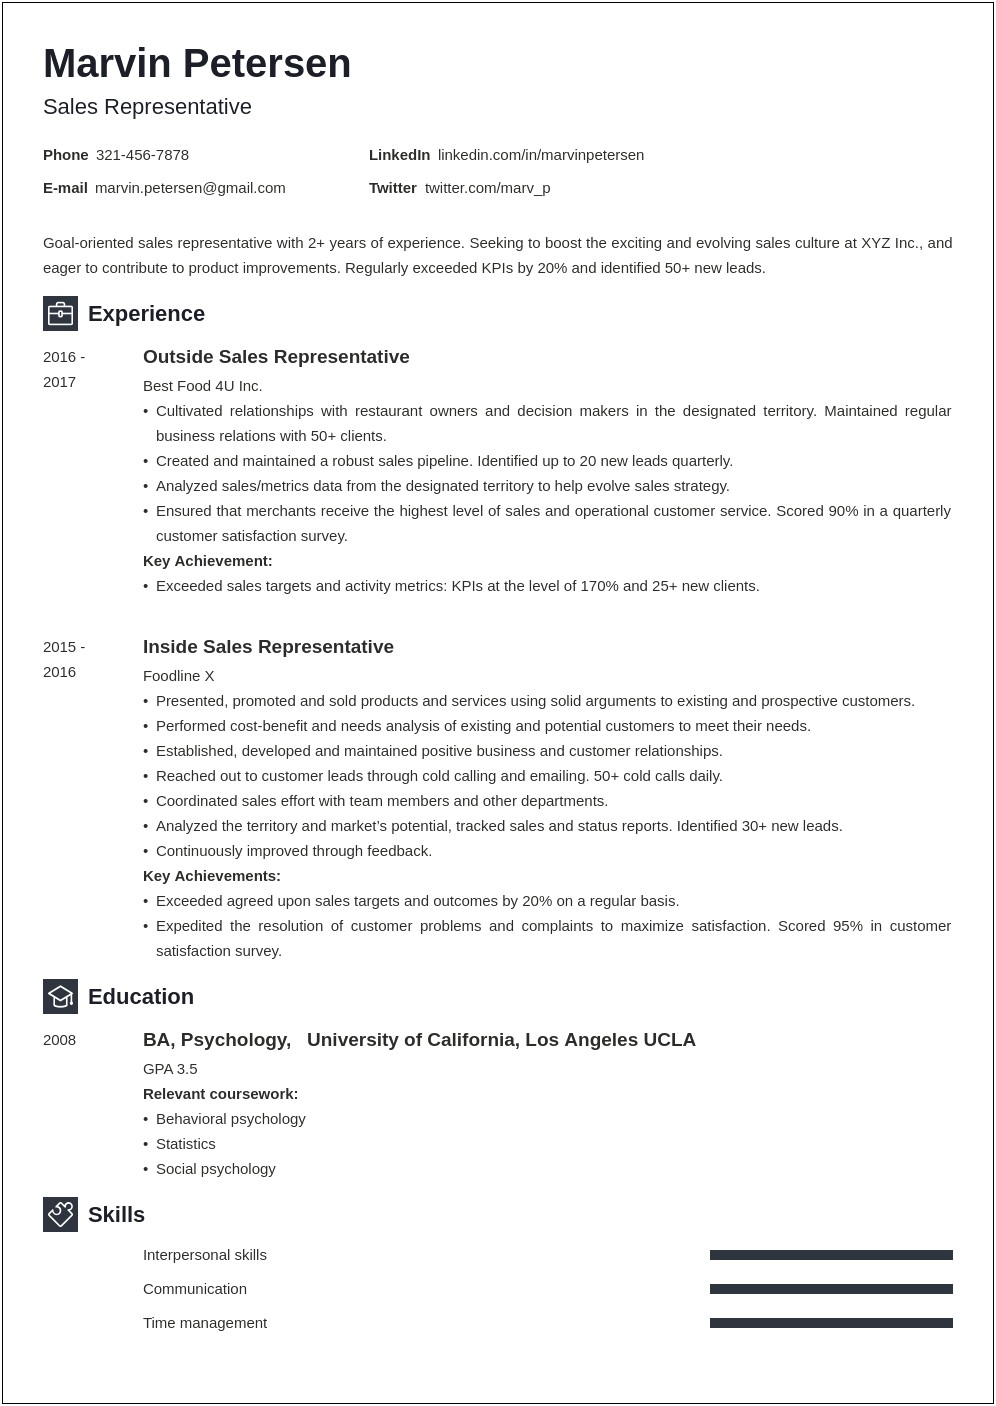 Resume Objective For Sales Professional